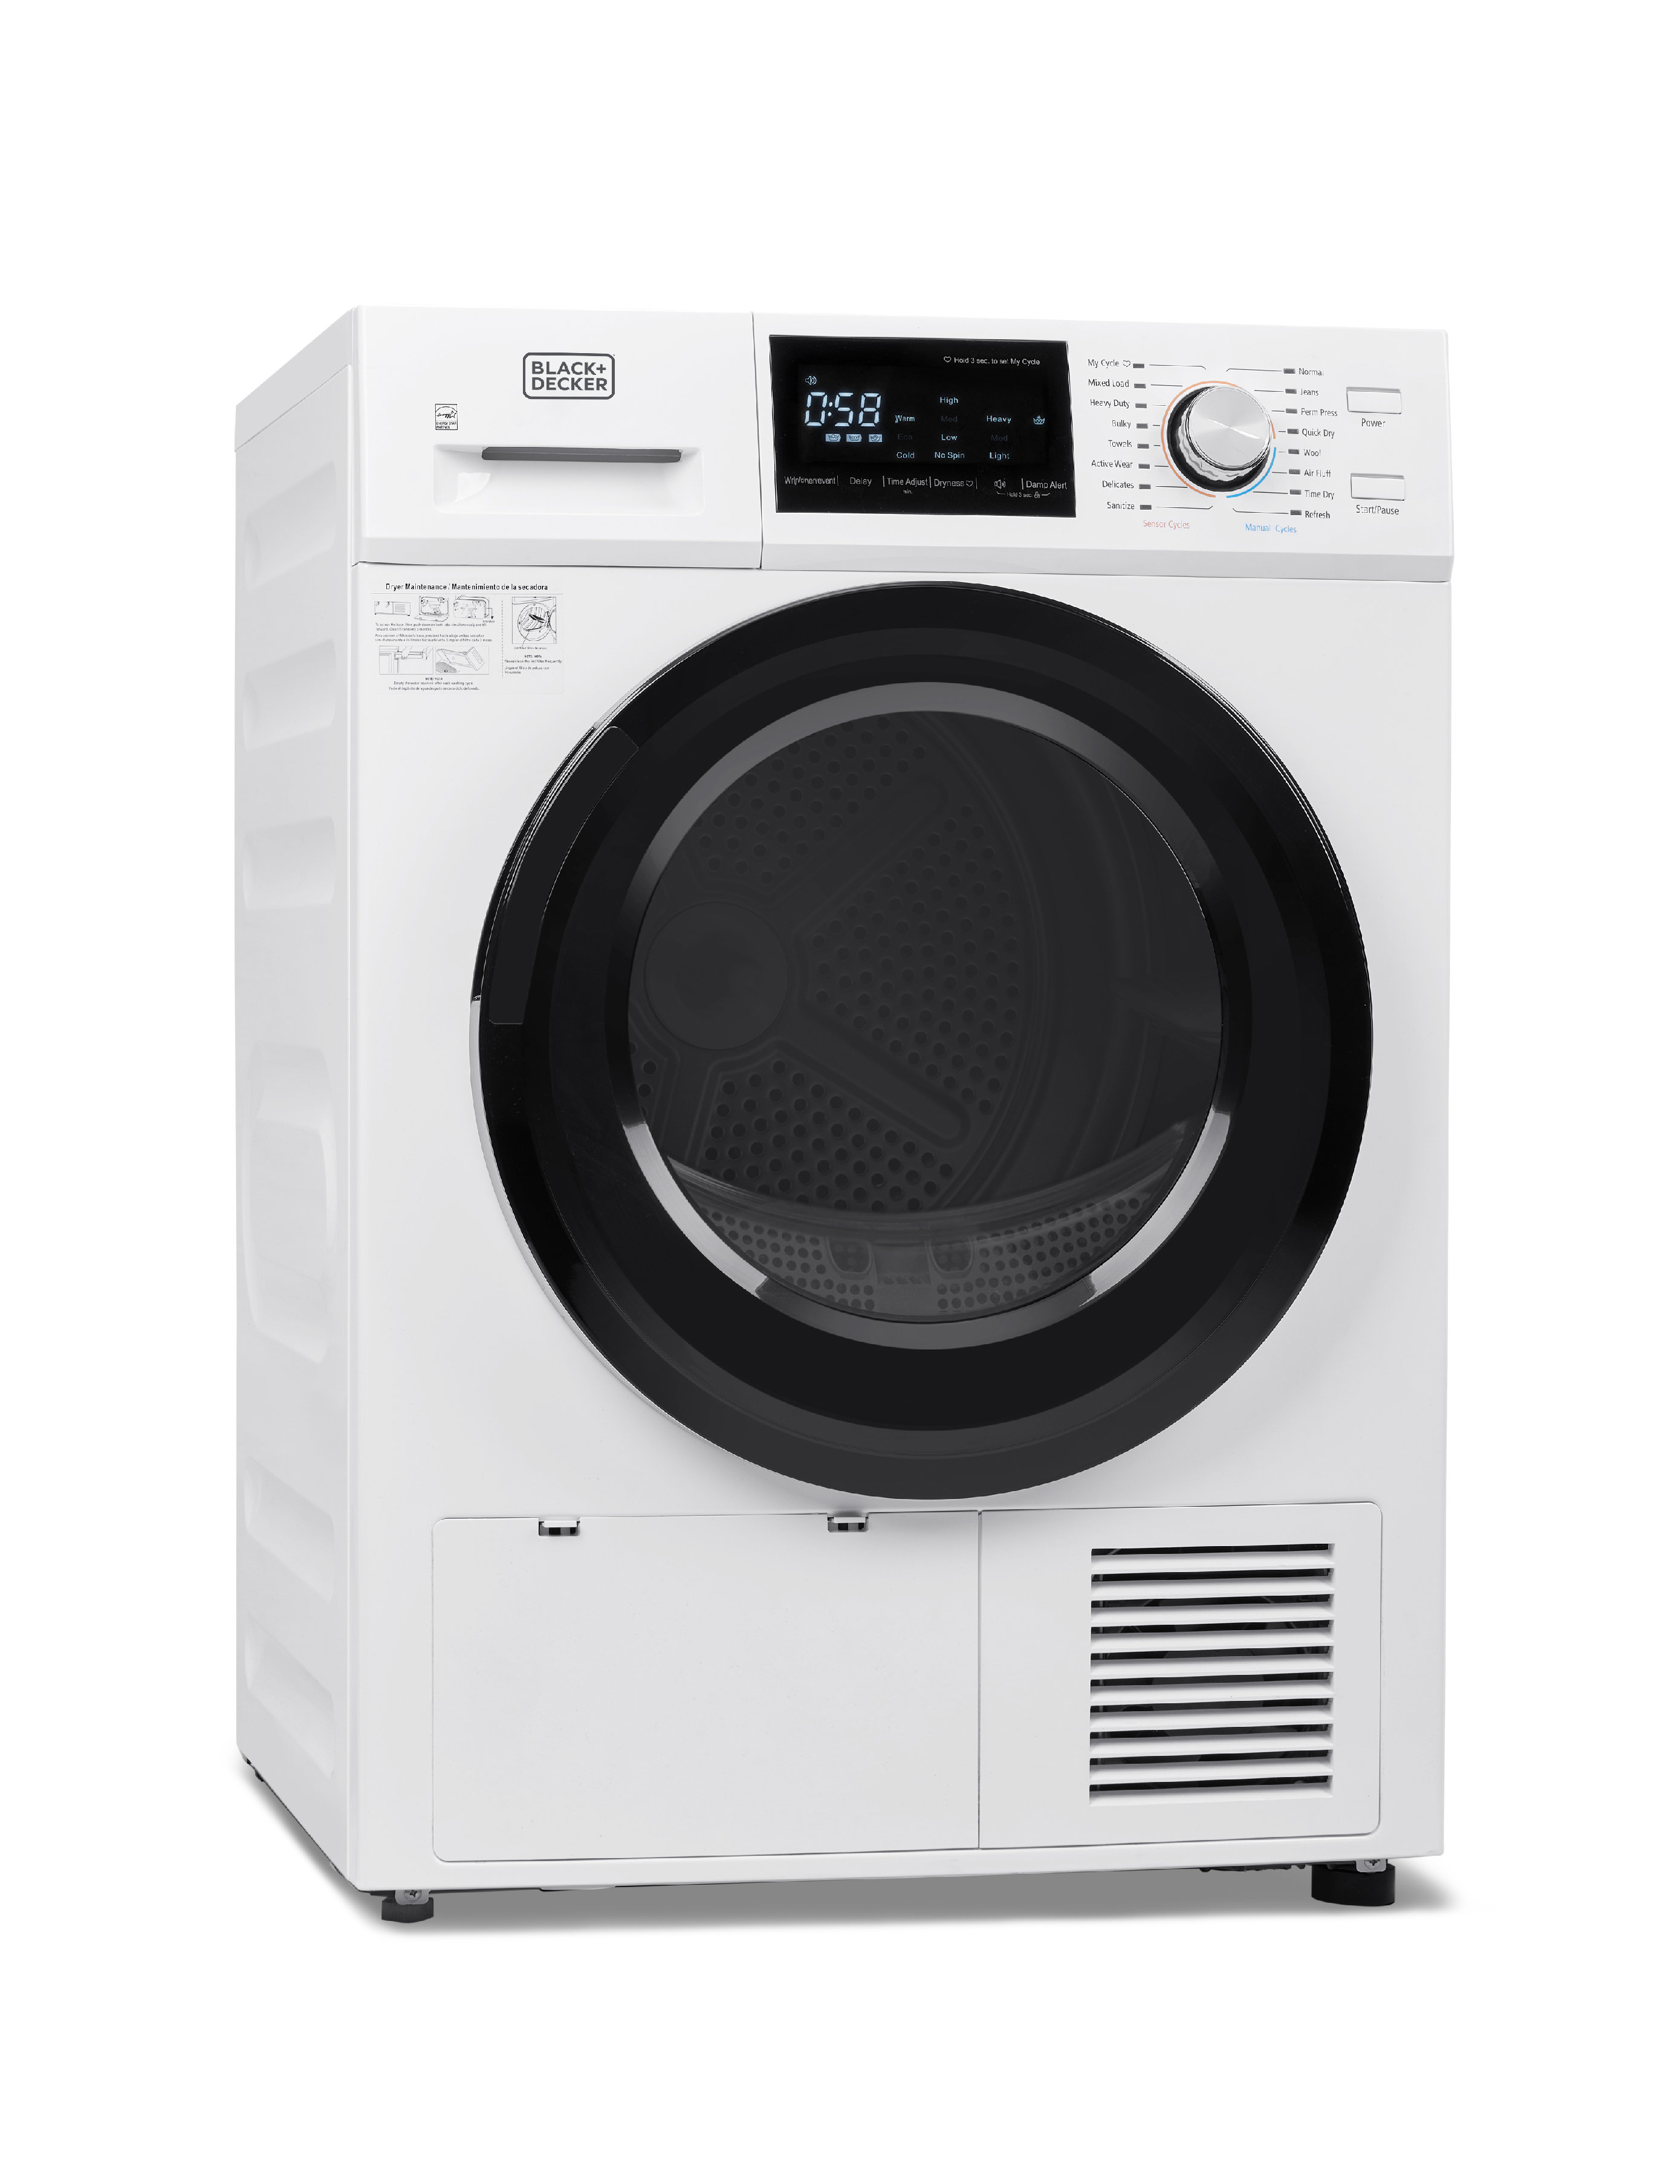 HomCom 1.38 Cubic Feet cu. ft. Portable Washer & Dryer Combo in White